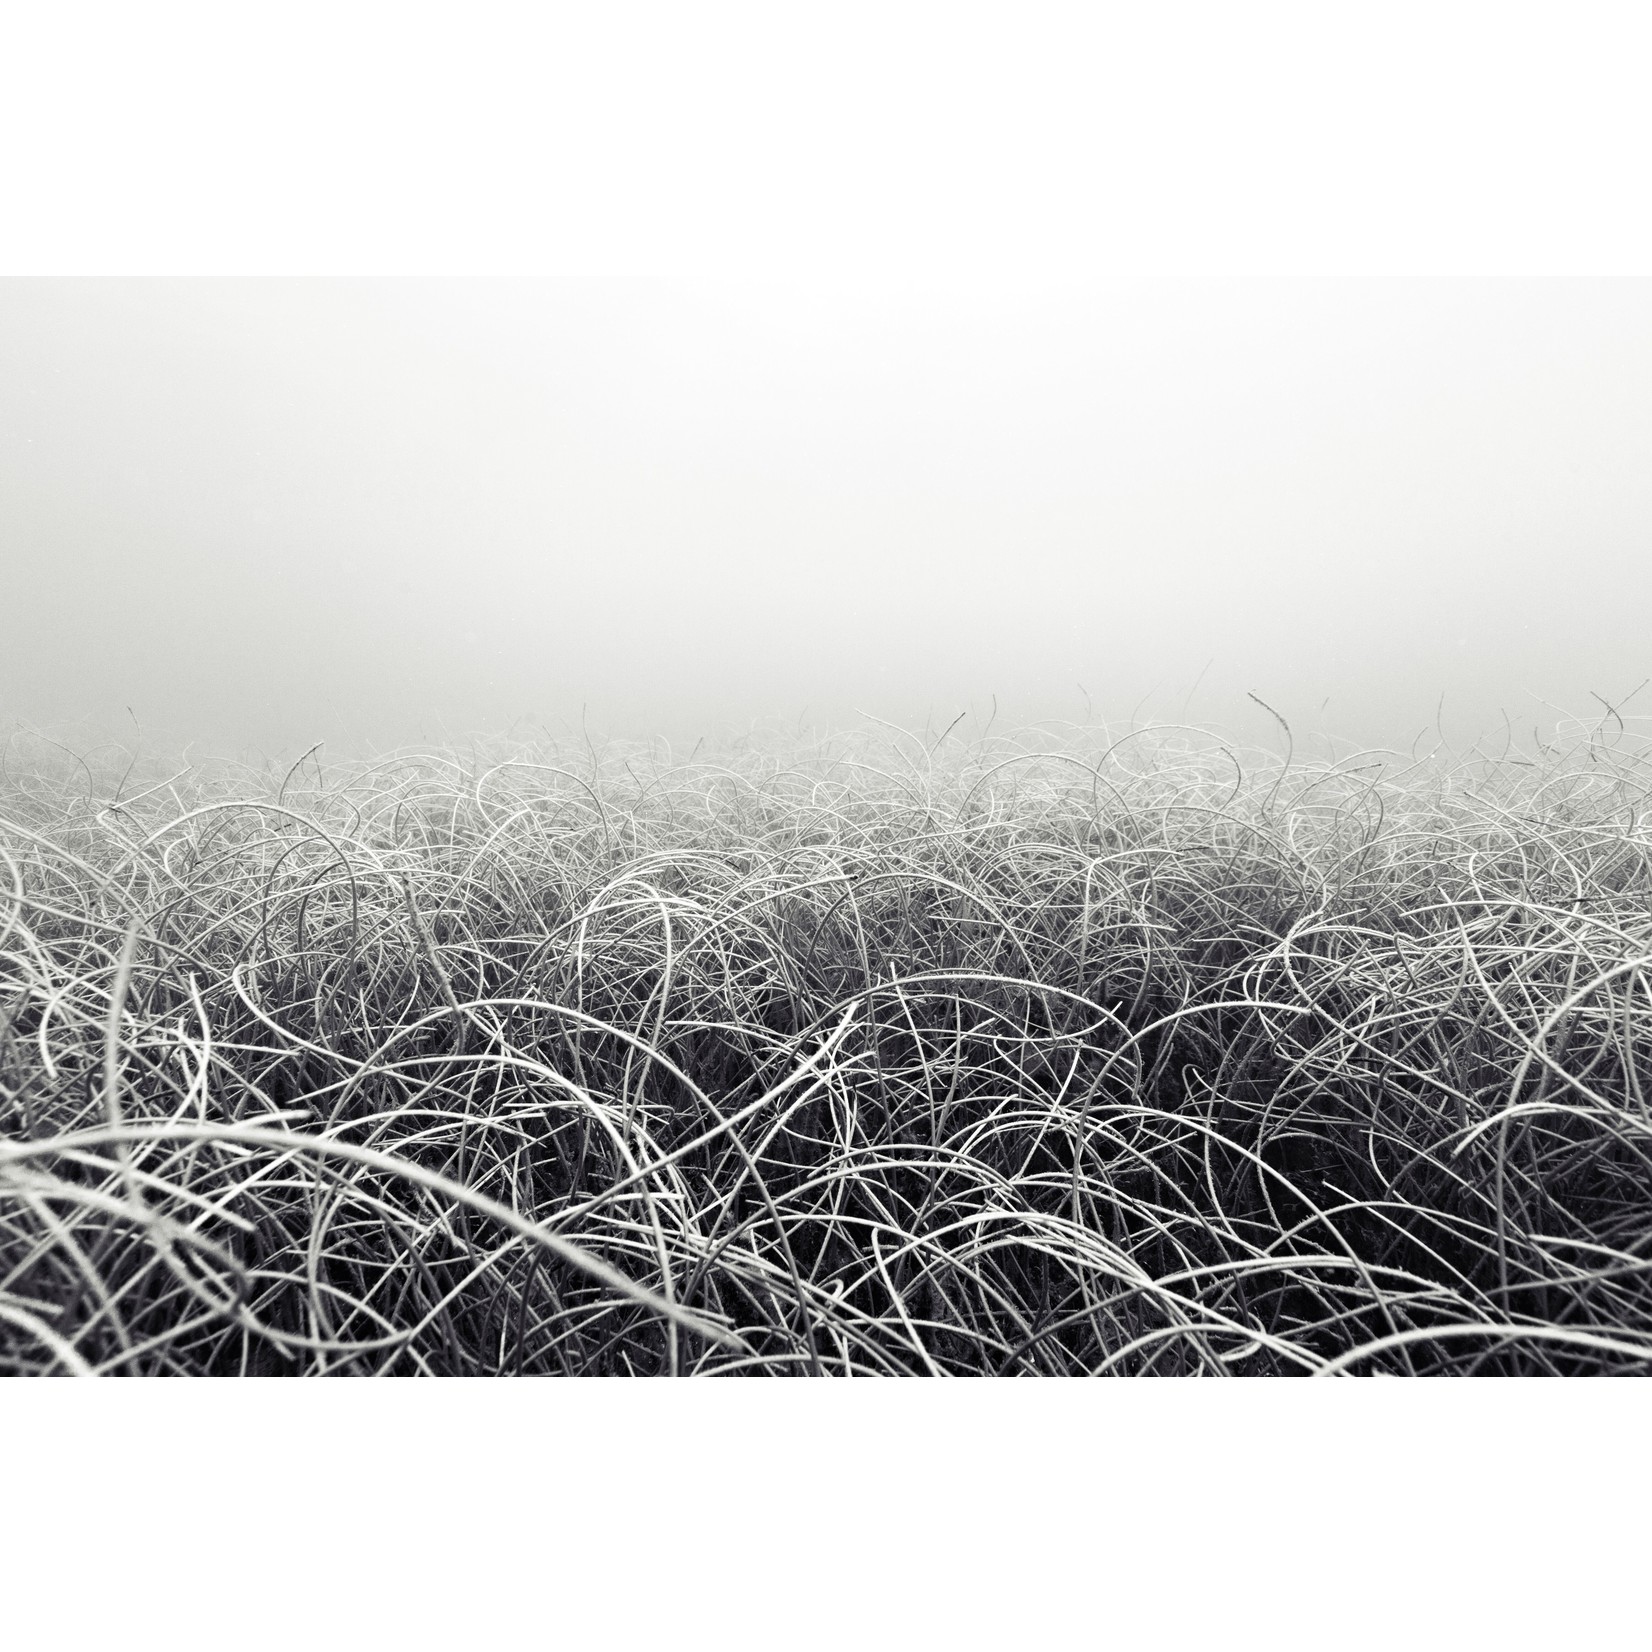 The Picturalist Fine Art Print on Rag Paper: Seabed by Enric Gener